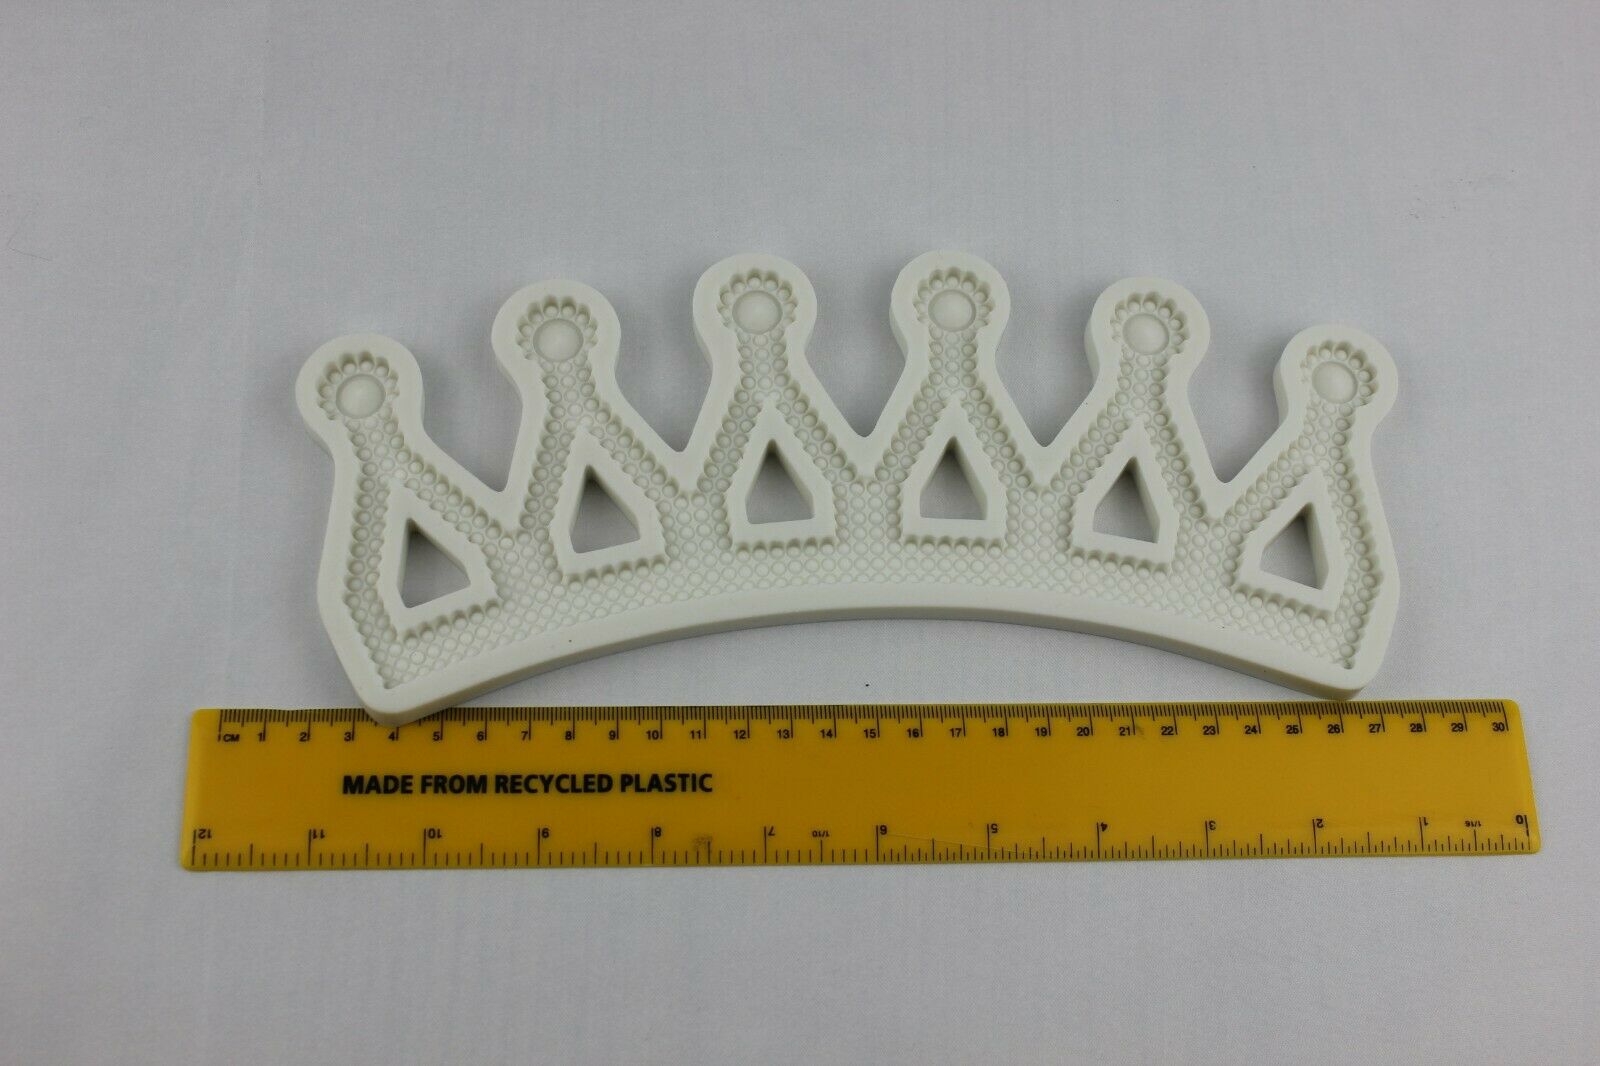 attachment-https://www.cupcakeaddicts.co.uk/wp-content/uploads/imported/9/Large-Crown-Royal-Baby-Prince-Princess-Silicone-Mould-Icing-Bake-Decoration-3-324447330429-2.jpg